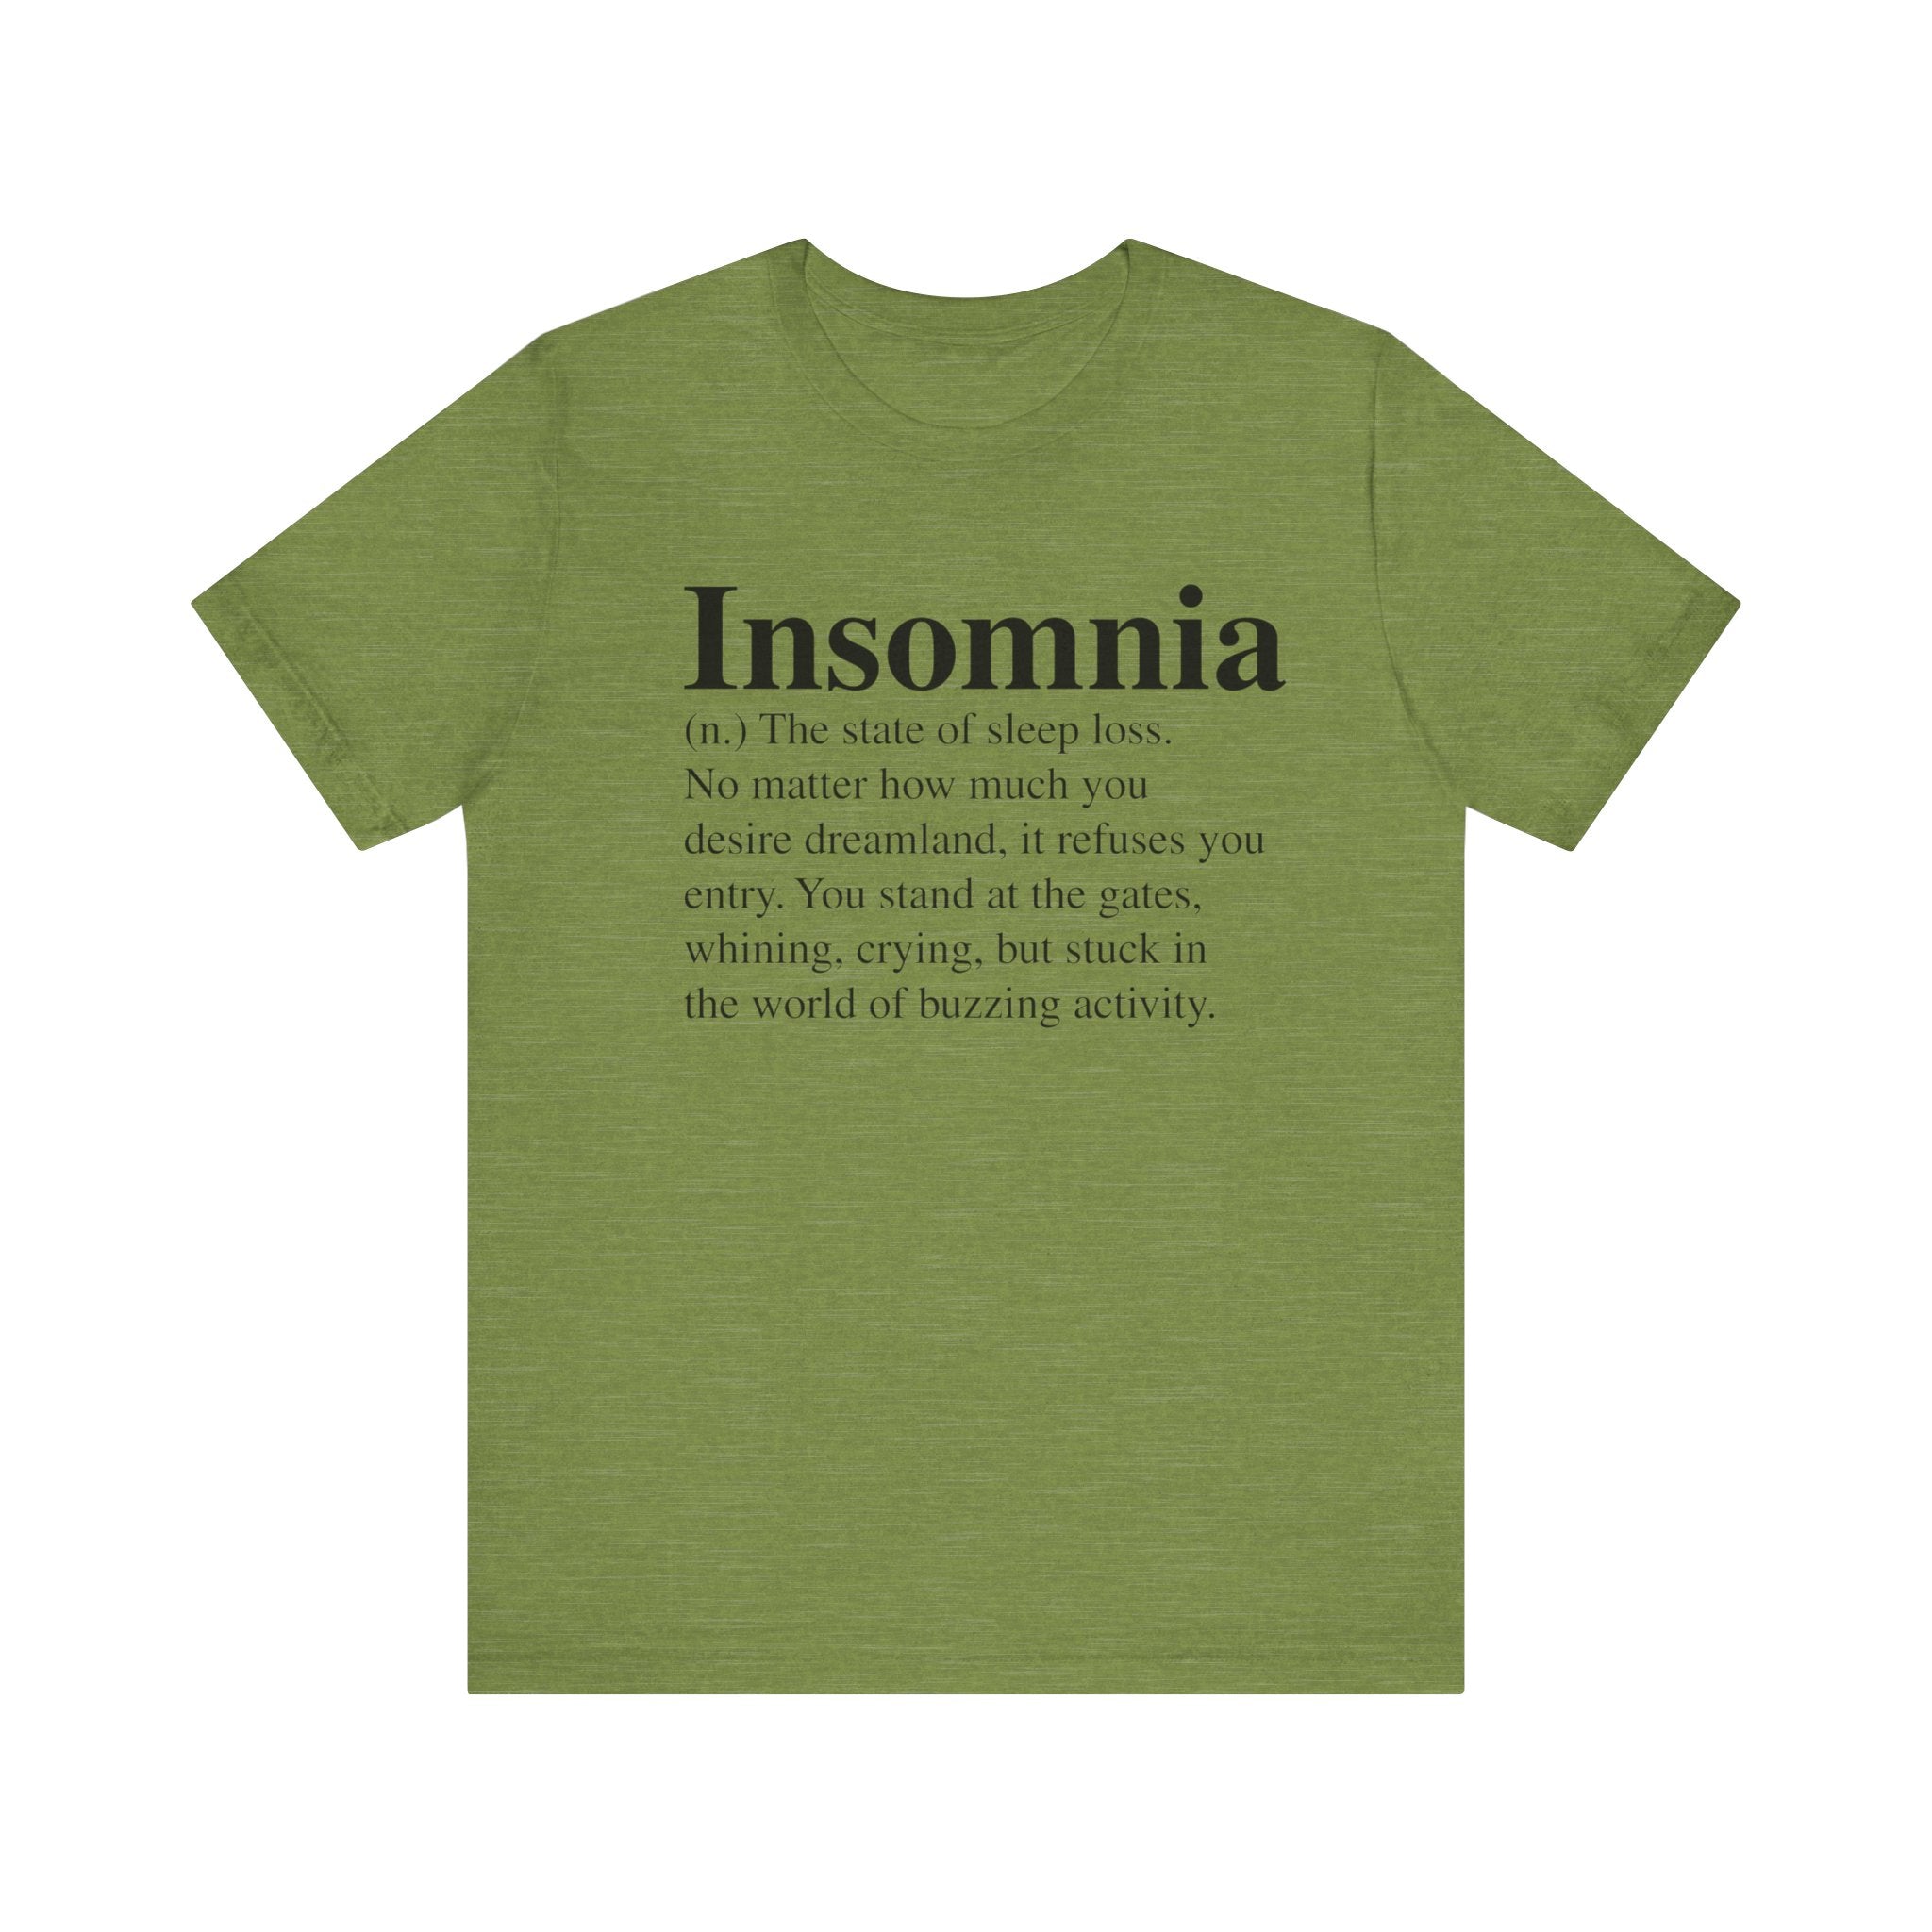 Soft cotton Insomnia T-shirt with the word "insomnia" printed on the front, followed by a definition and descriptive text about the condition.